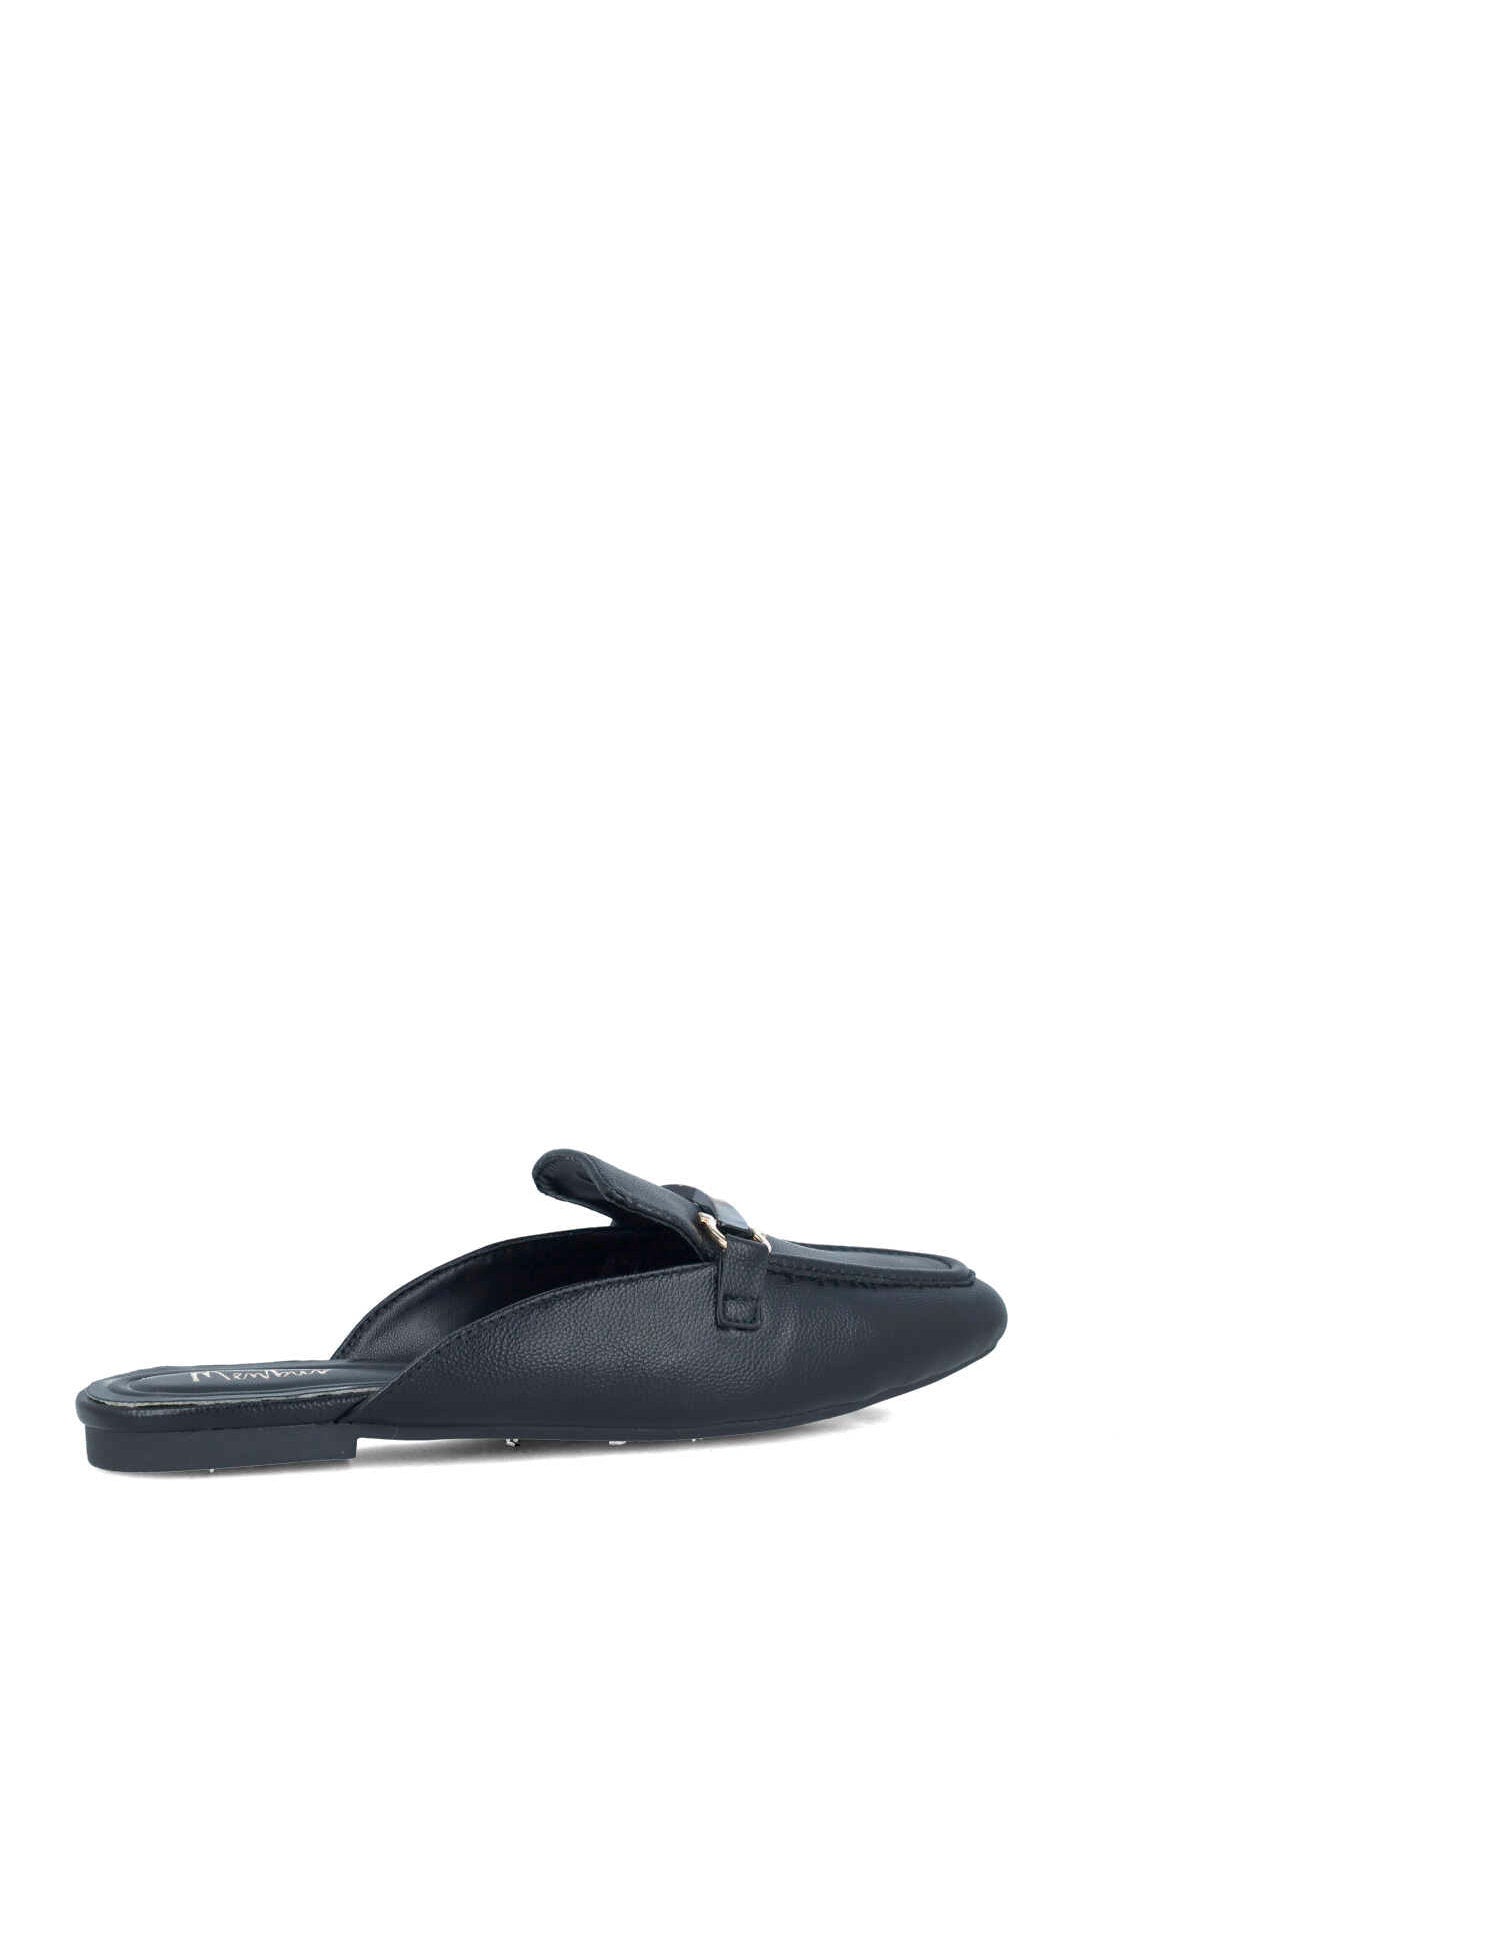 Black Slipper Mules With Silver Hardware_25560_01_03